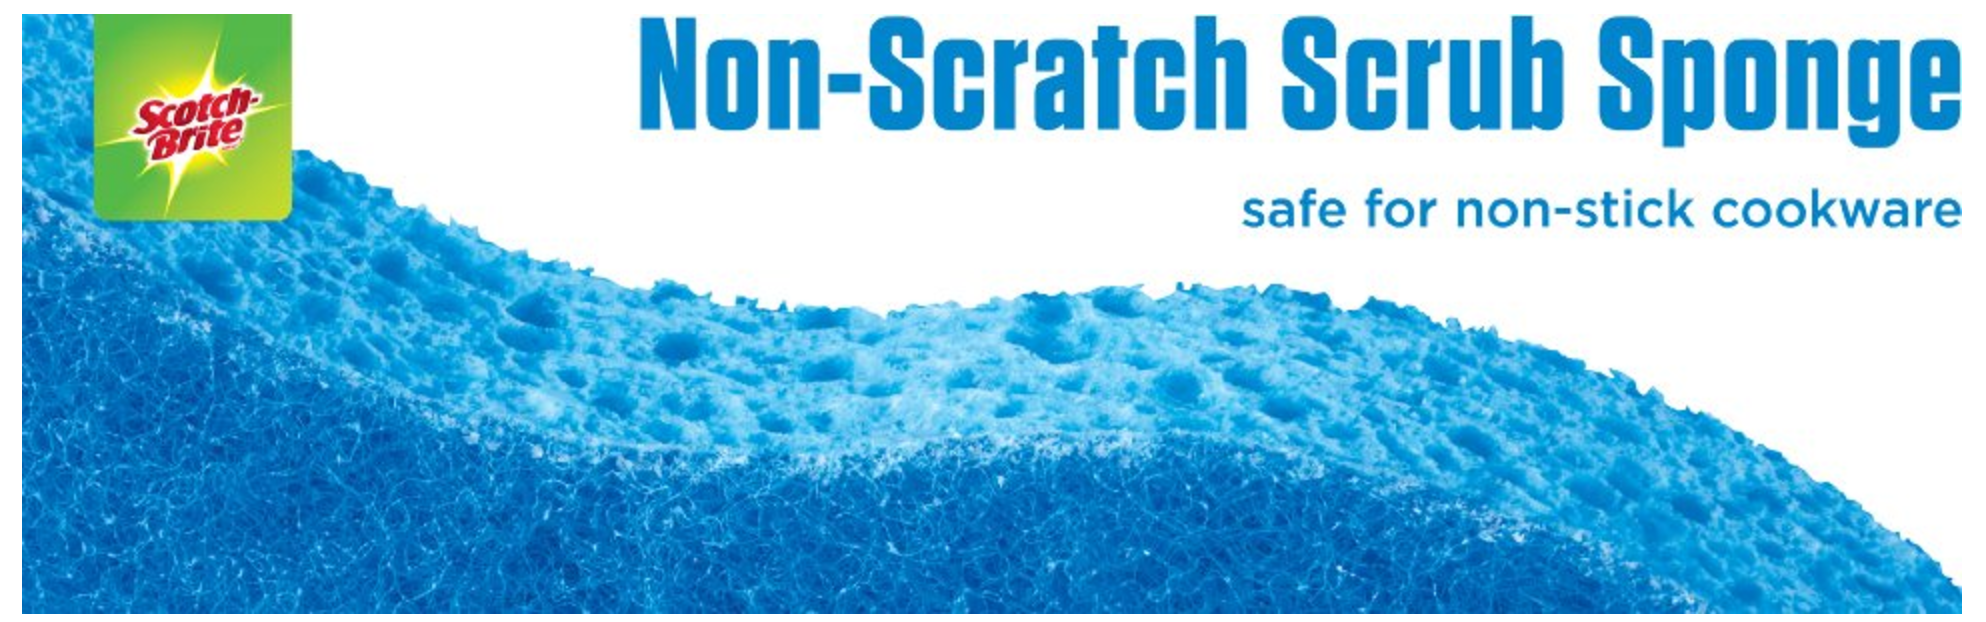 *WILL SELL OUT* Scotch-Brite Non-scratch Scrub Sponge, 3 Count (Pack of 8) as low as $9.04 shipped!